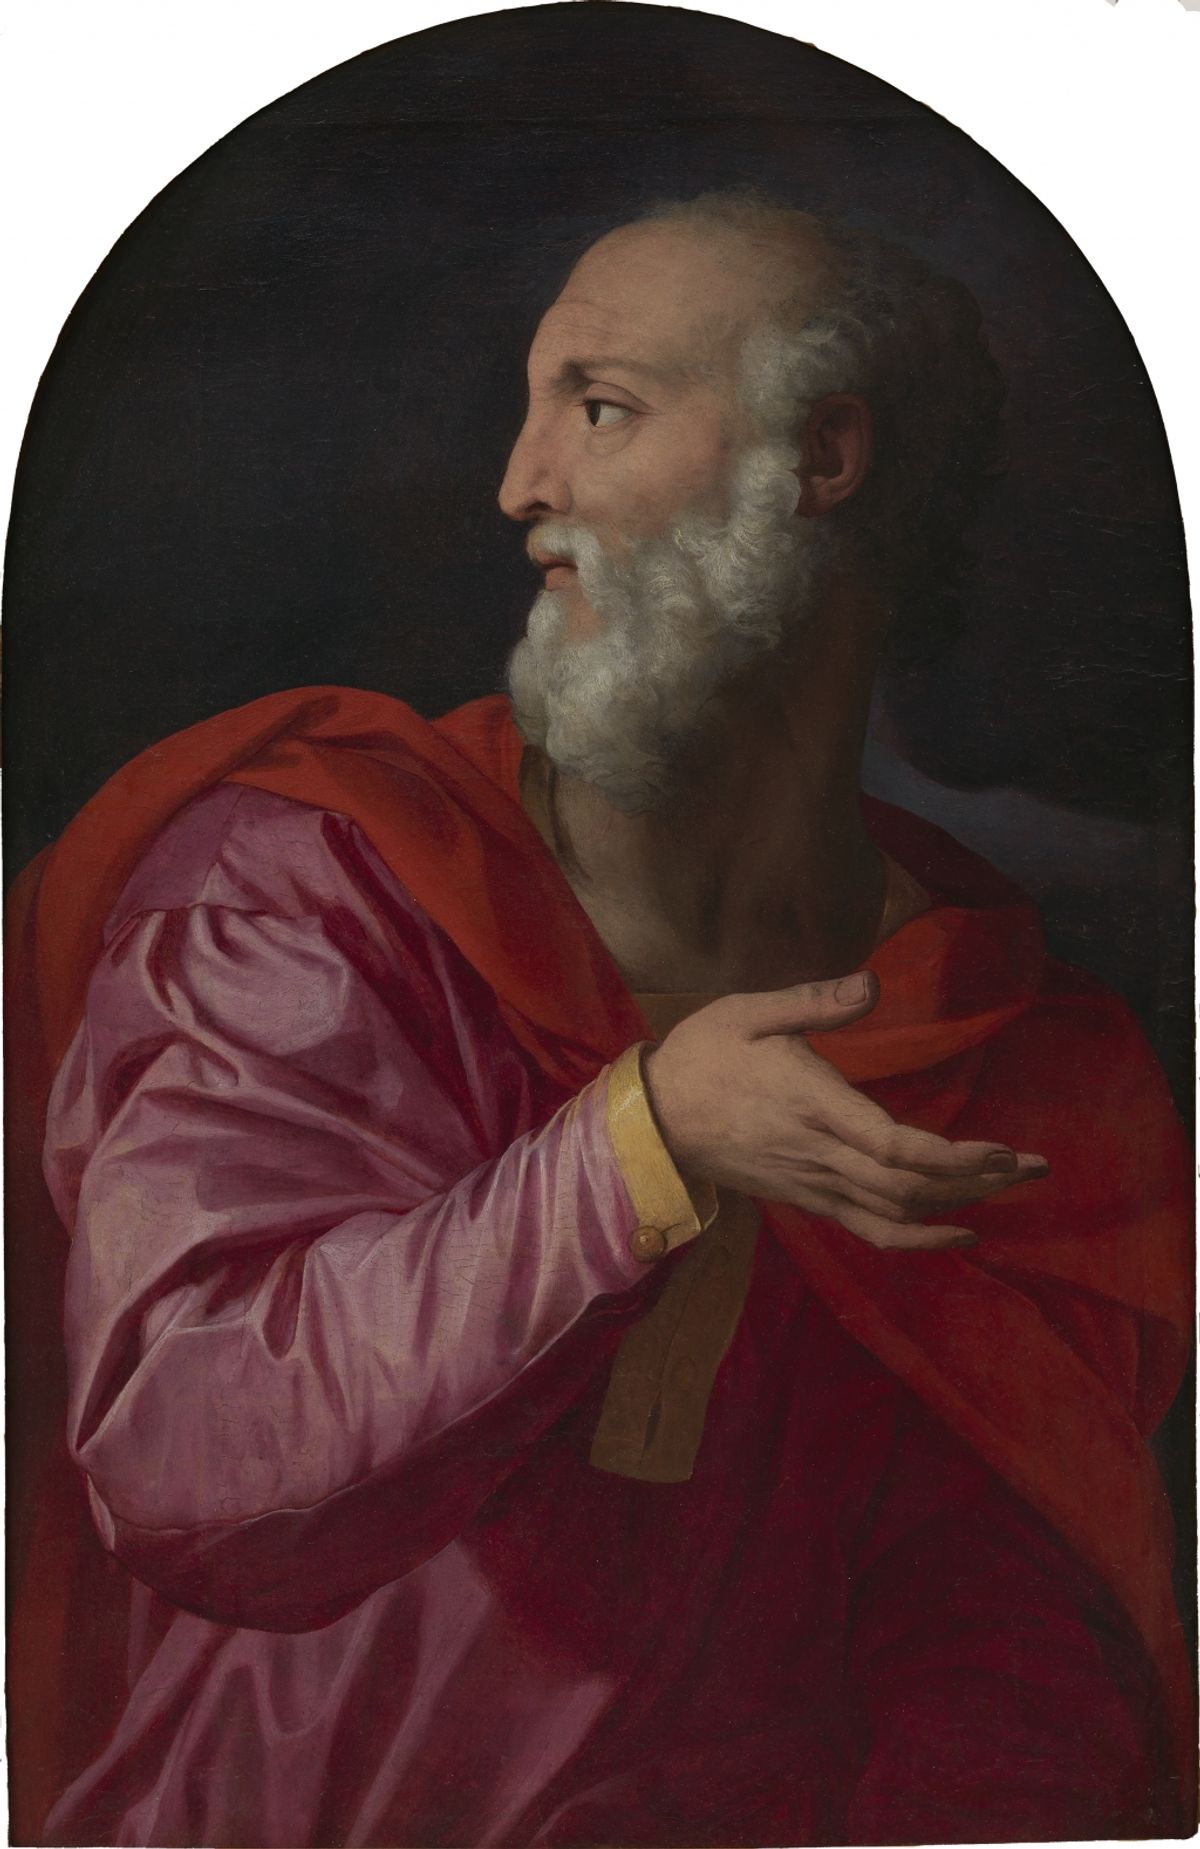 Saint Cosmas, attributed to Agnolo di Cosimo, better known as Bronzino. Courtesy of the Alana Collection